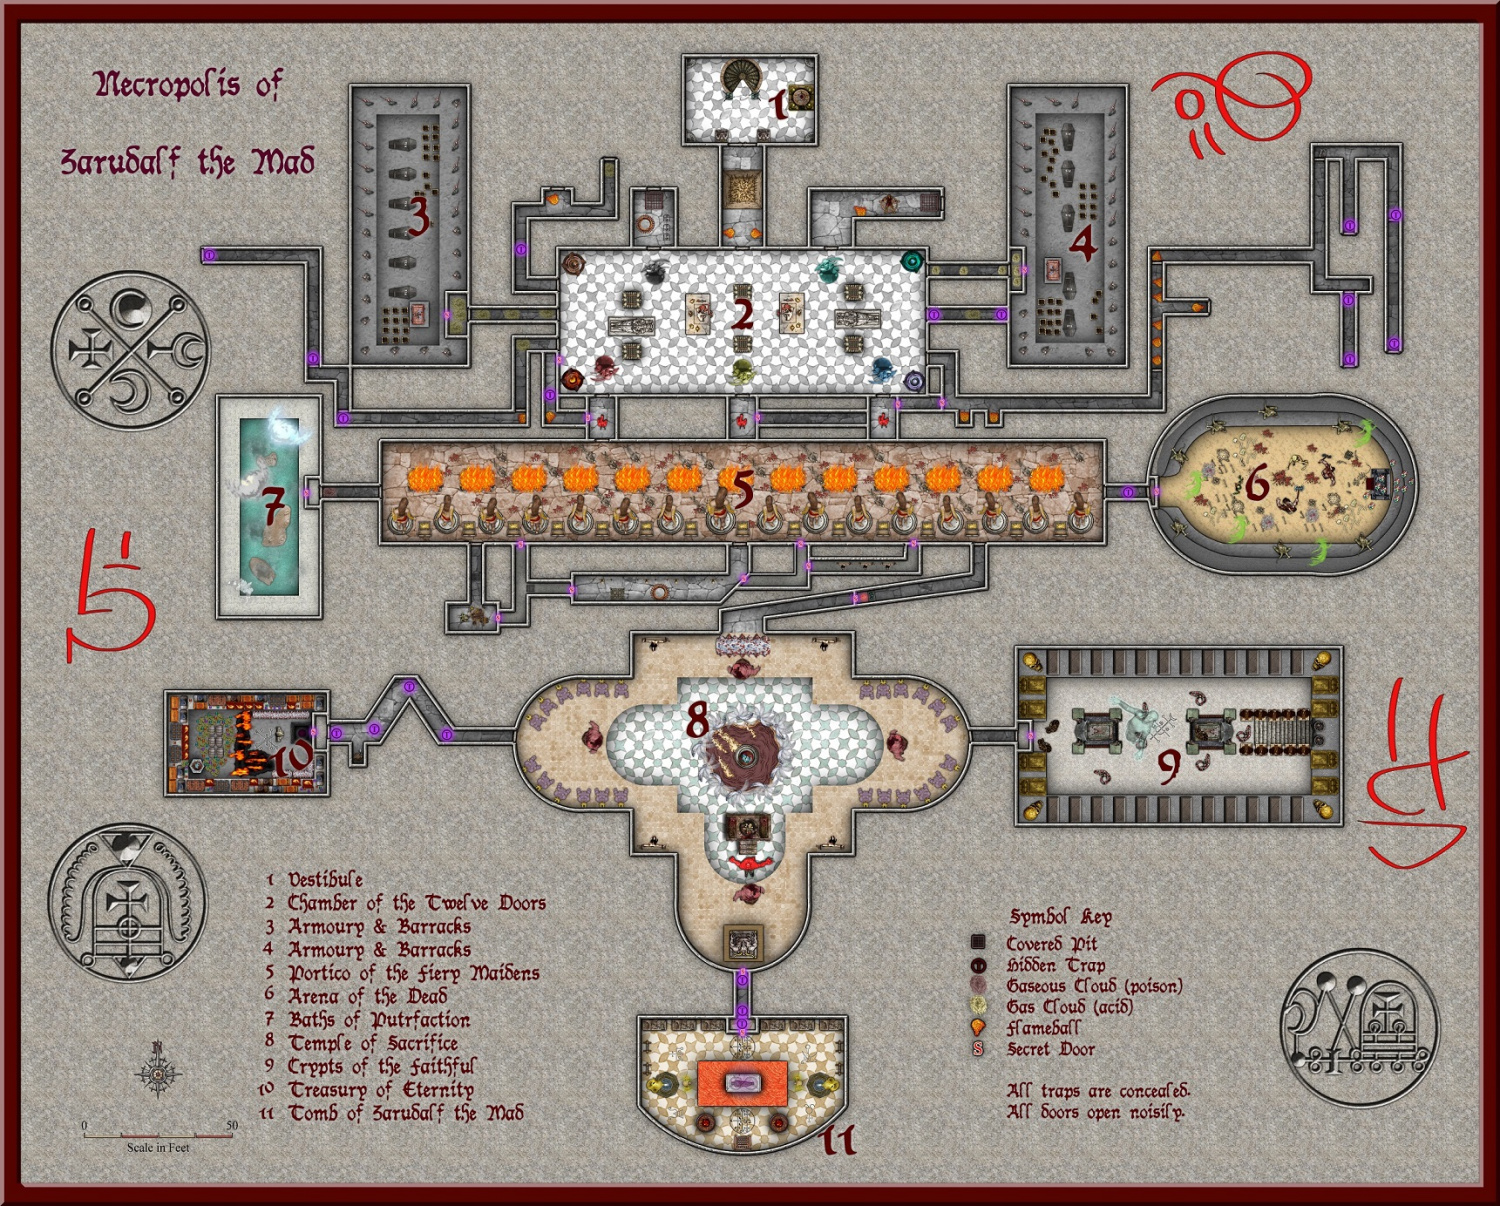 D temple of the unholy dungeon level 07 - necropolis of zarudalf the mad.jpg